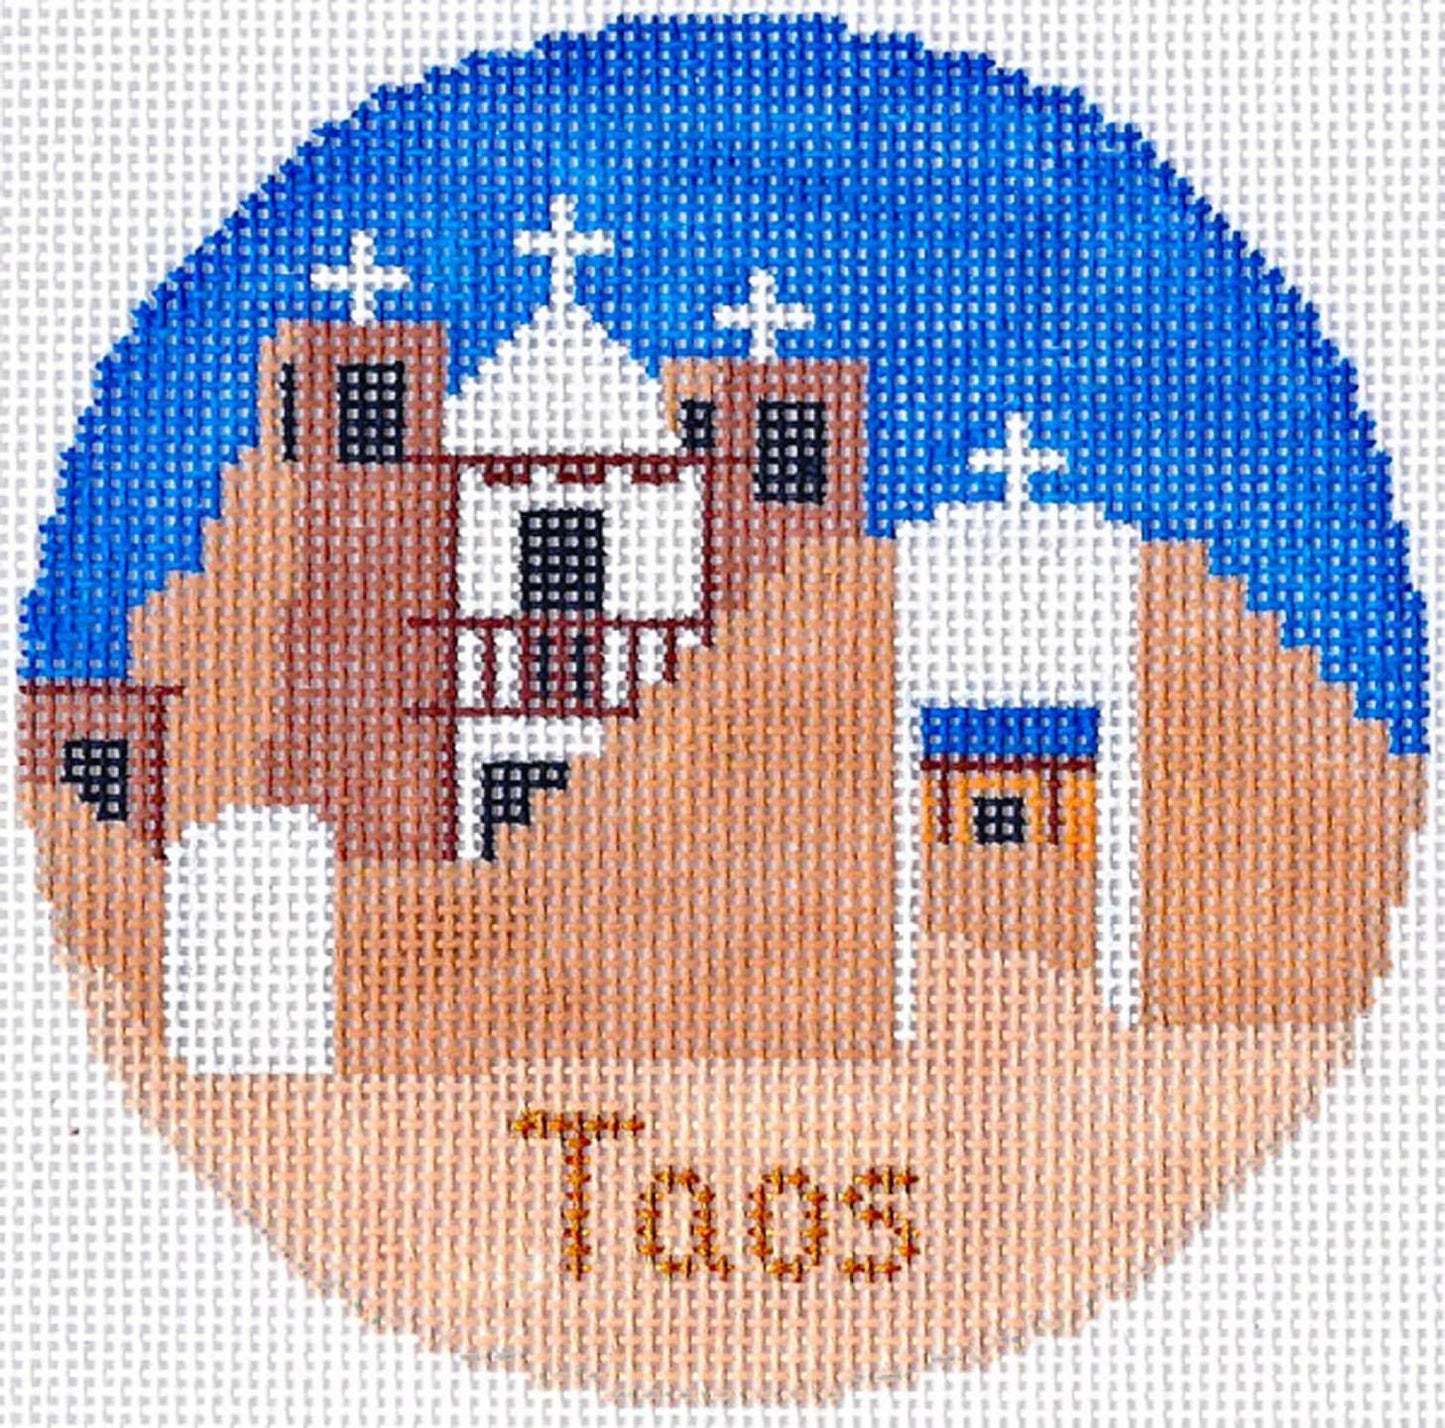 Travel Round ~ Taos, New Mexico handpainted 4.25" Needlepoint Canvas by Silver Needle